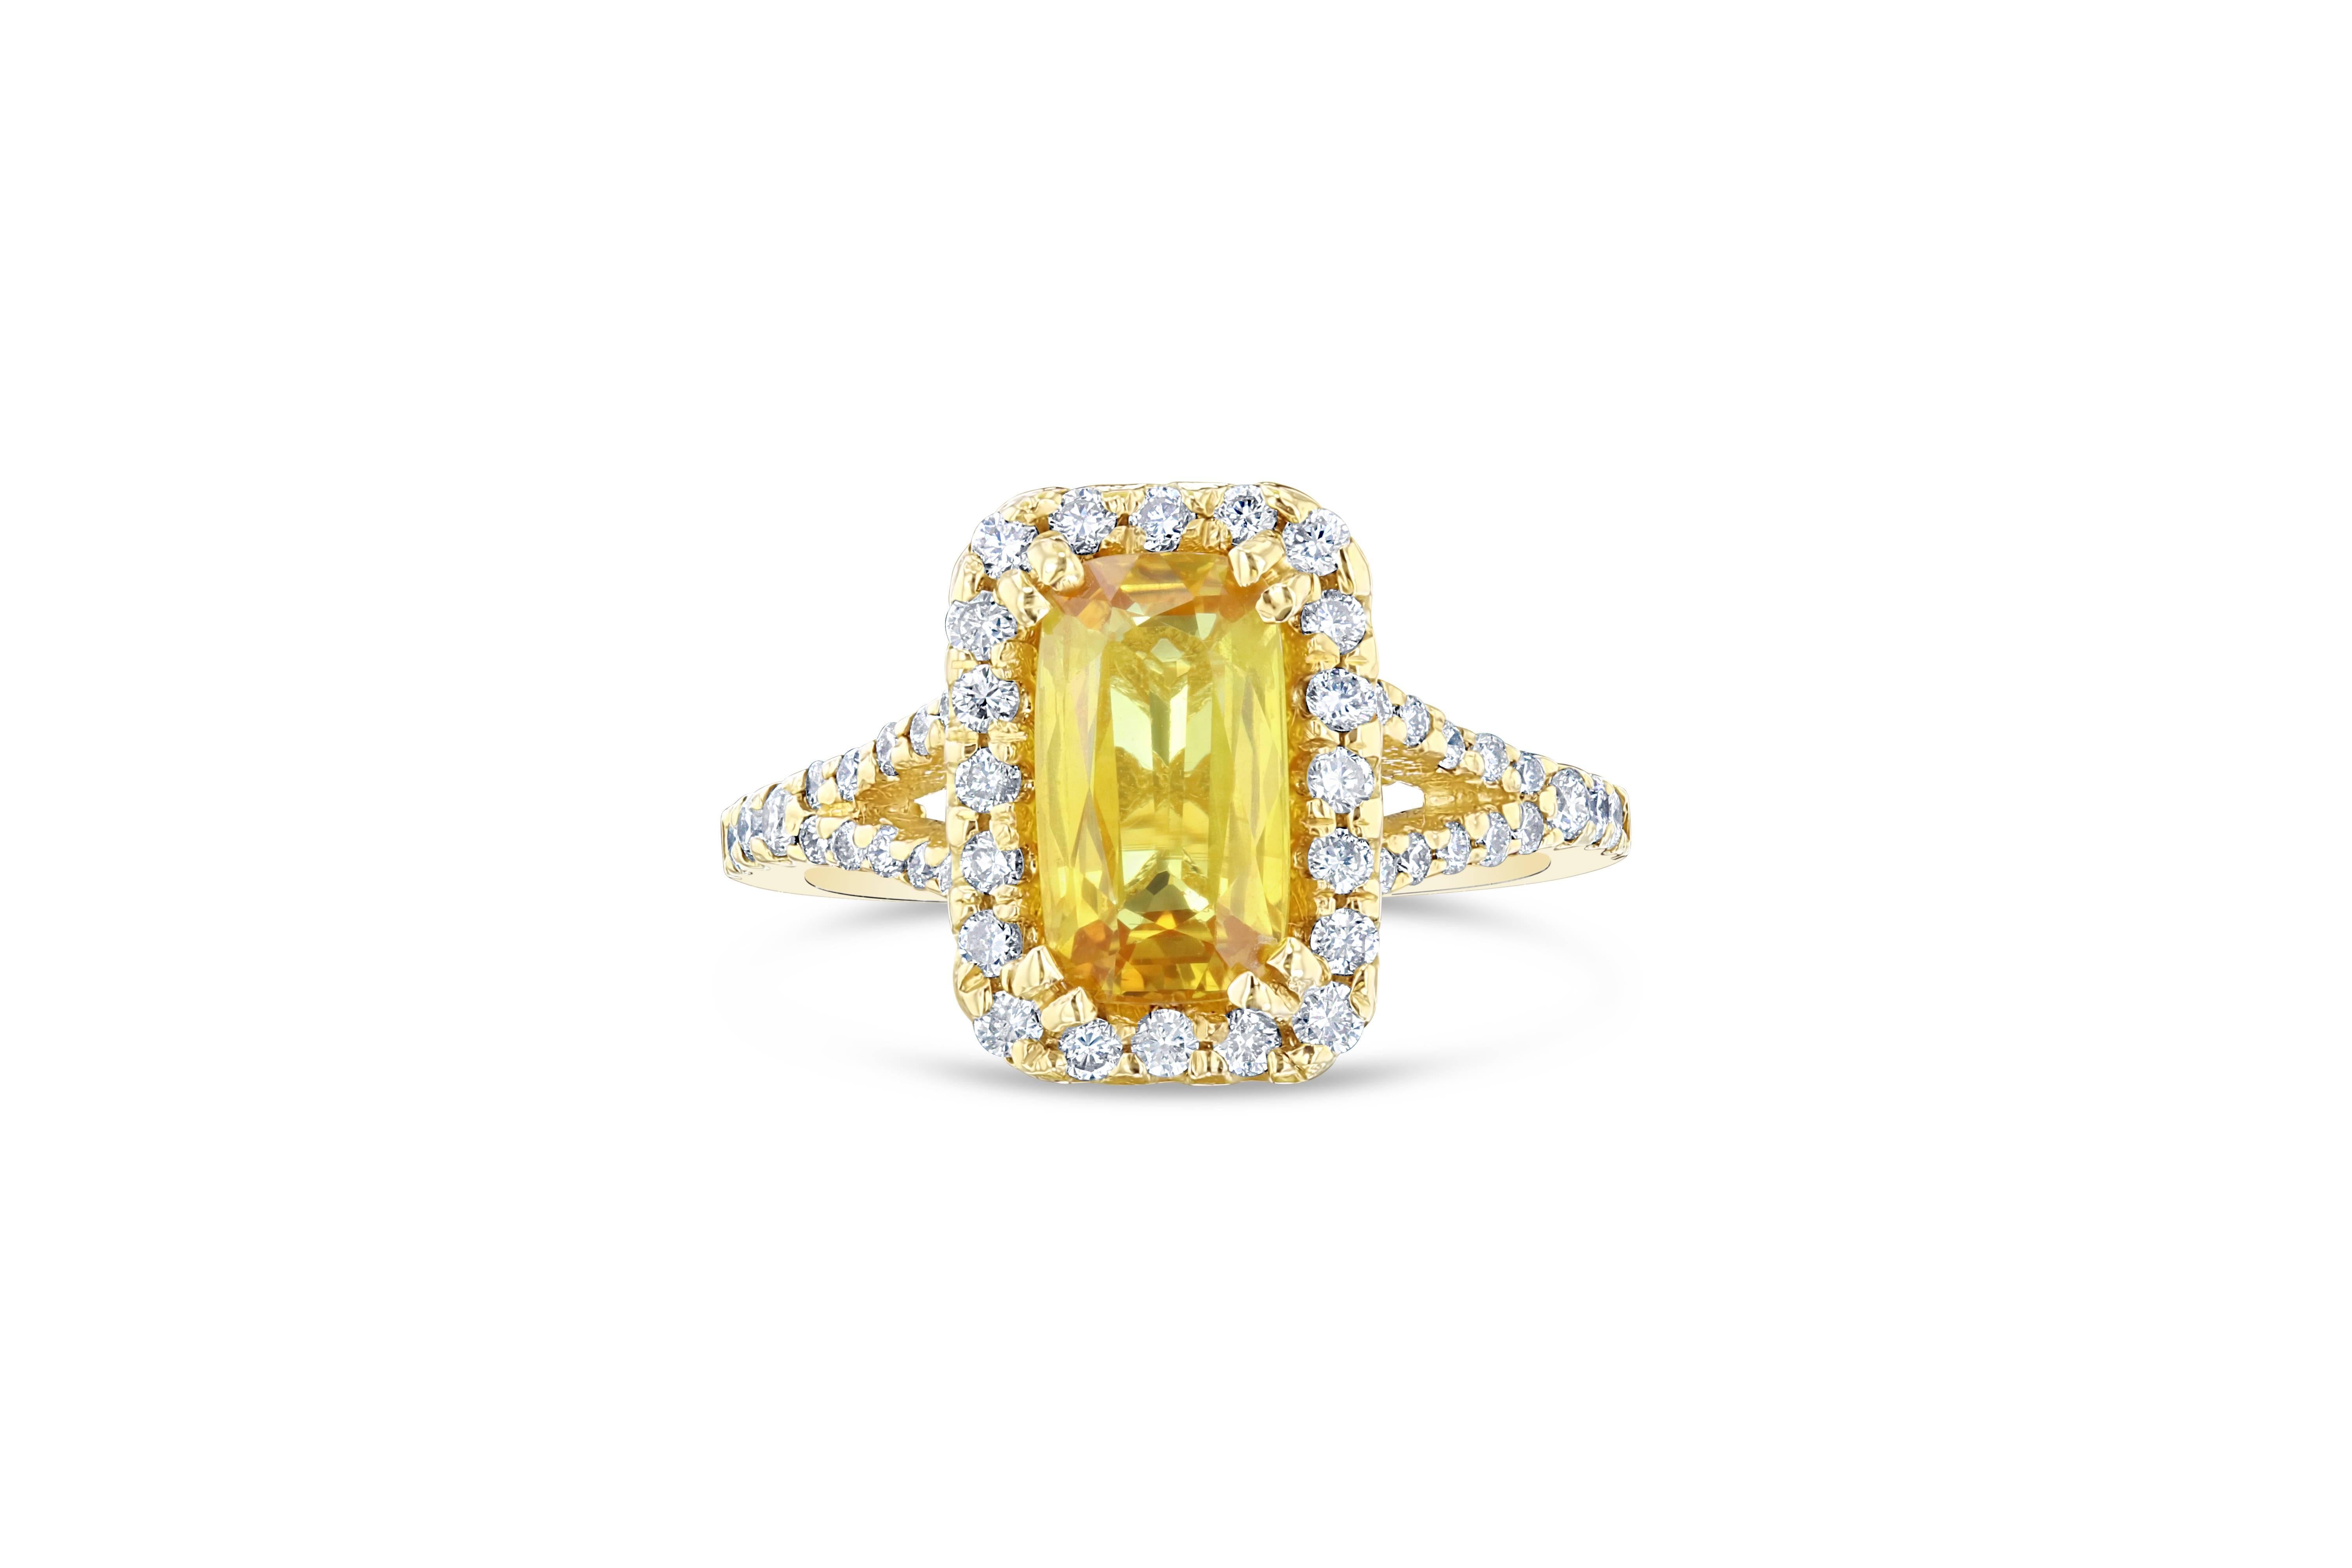 Classic Yellow Sapphire and Diamond Ring! This ring has a 2.30 carat Rectangle Cut Yellow Sapphire in the center of the ring and is surrounded by a Halo of 46 Round Cut Diamonds that weigh 0.55 carats. The clarity and color is VS2/H. This ring is